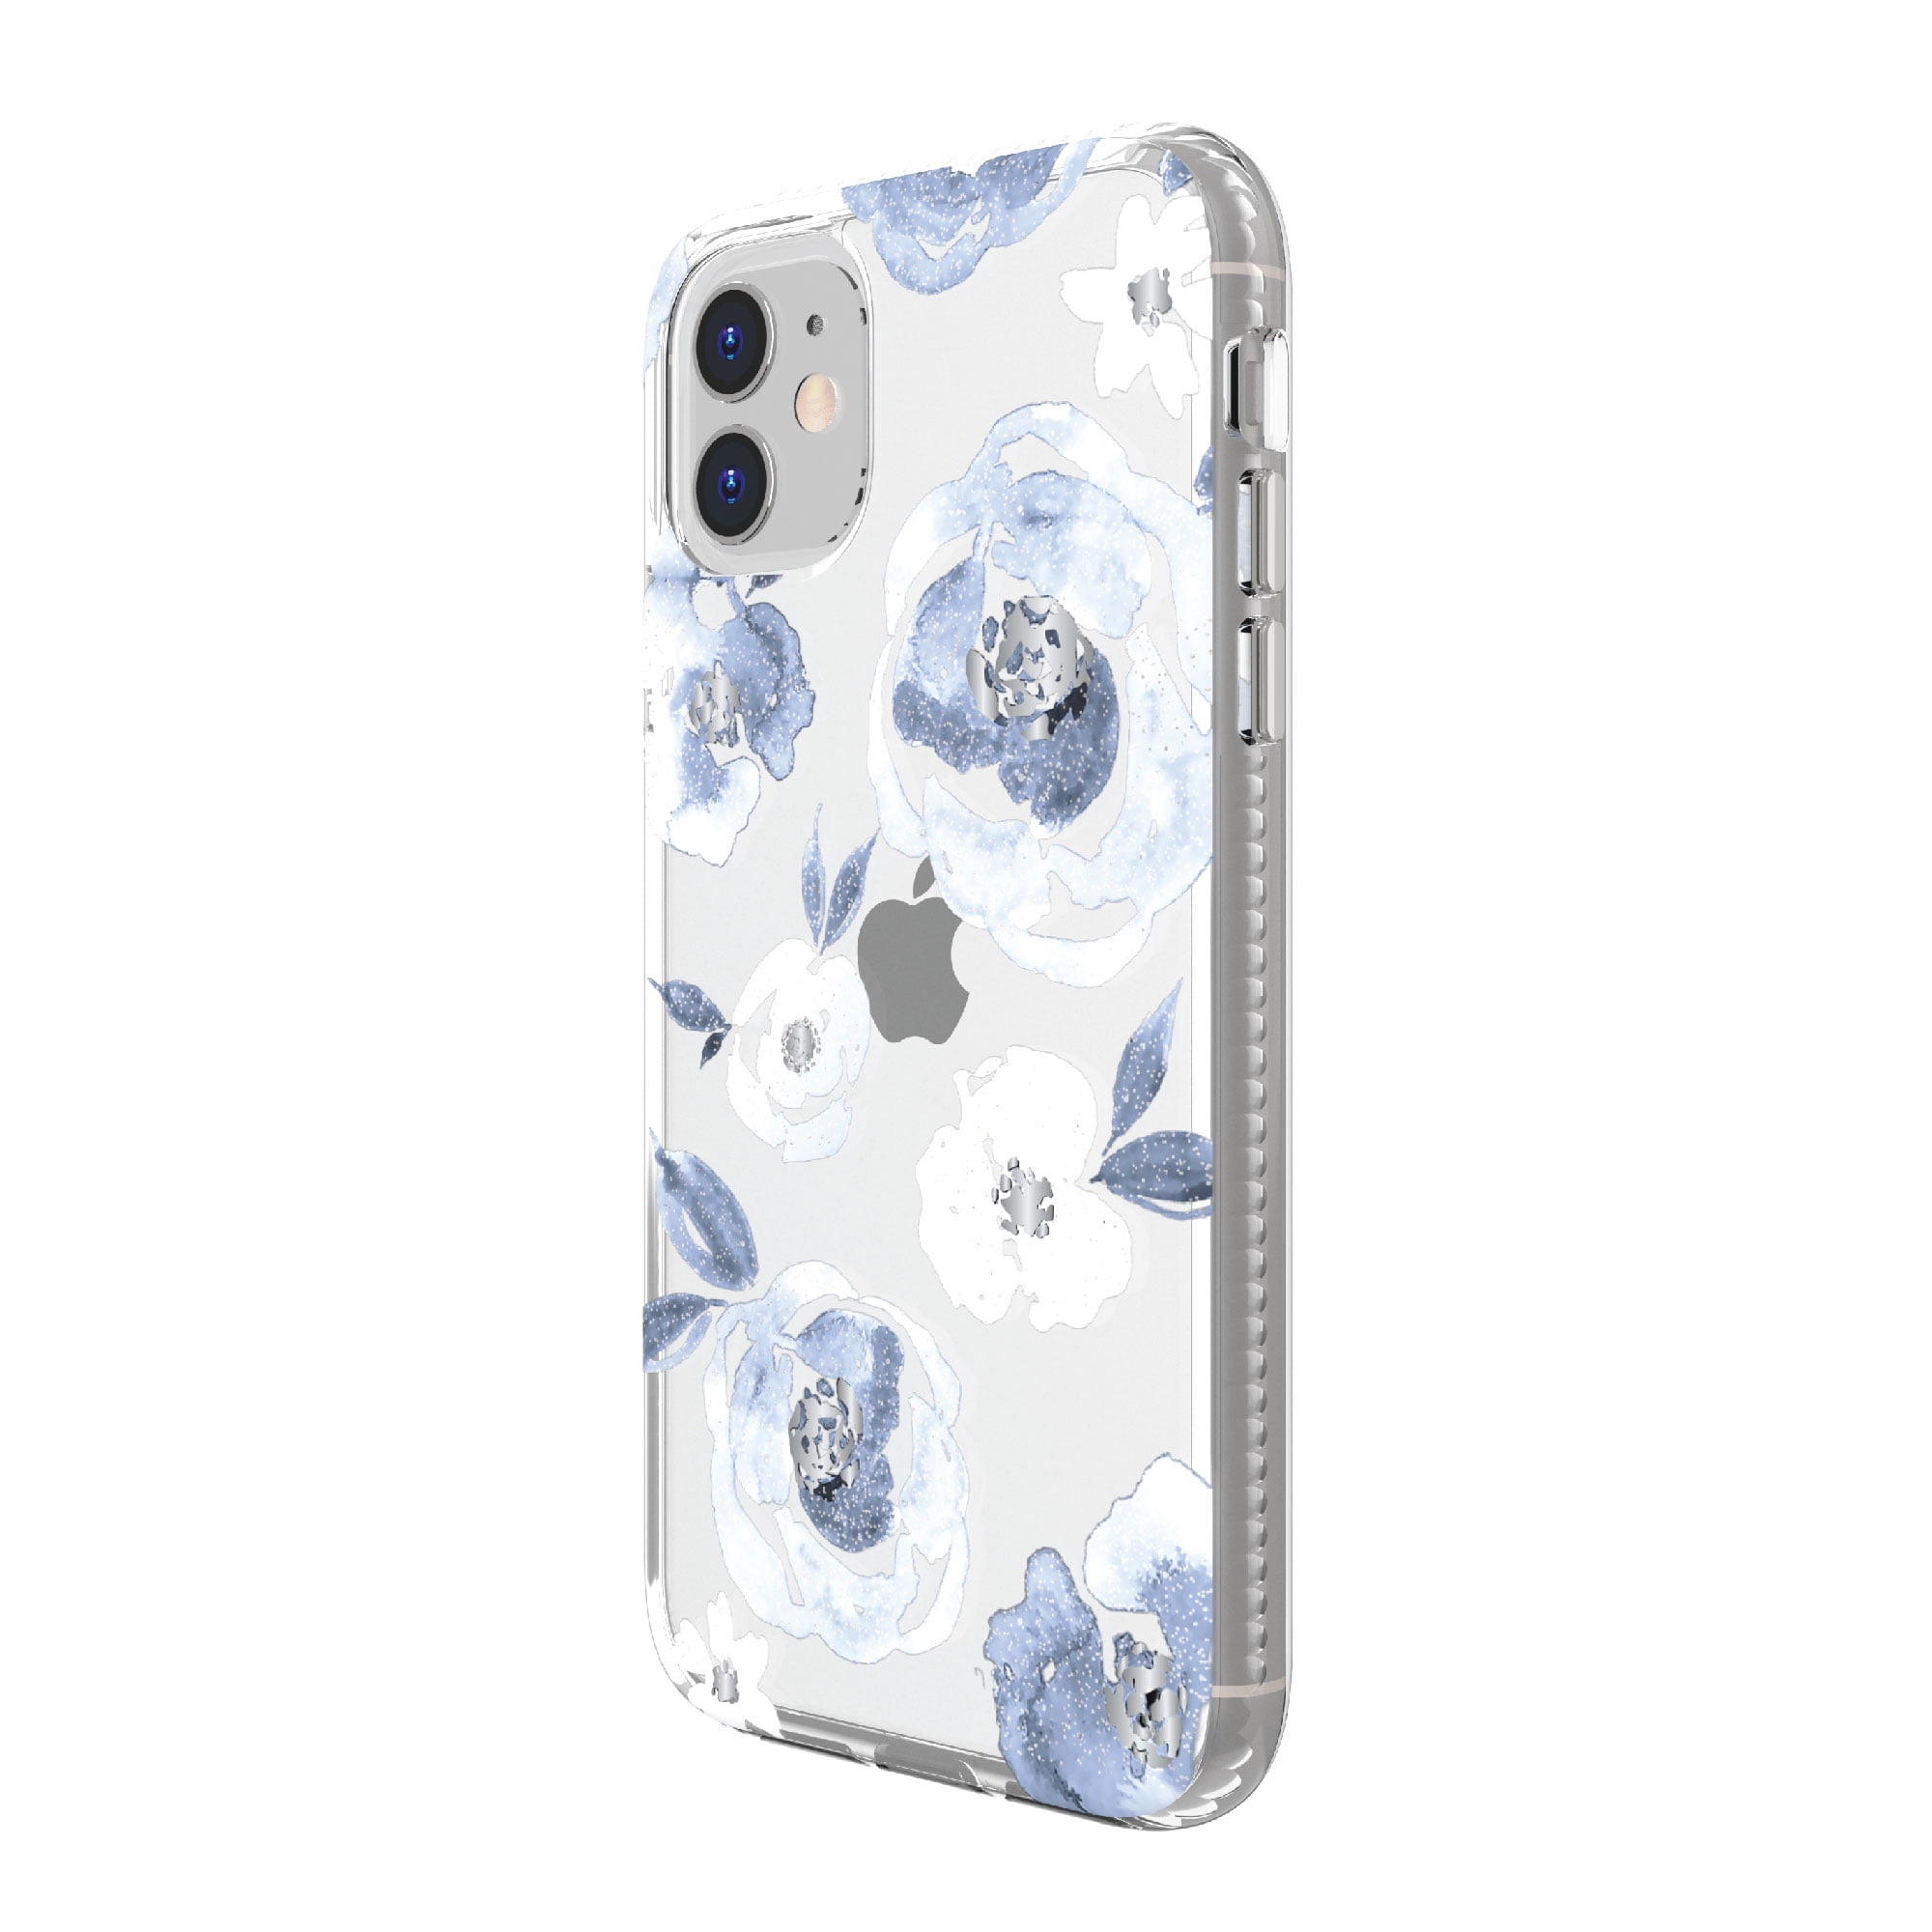 onn. Blue Floral with Glitter Phone Case for iPhone 11 / iPhone XR